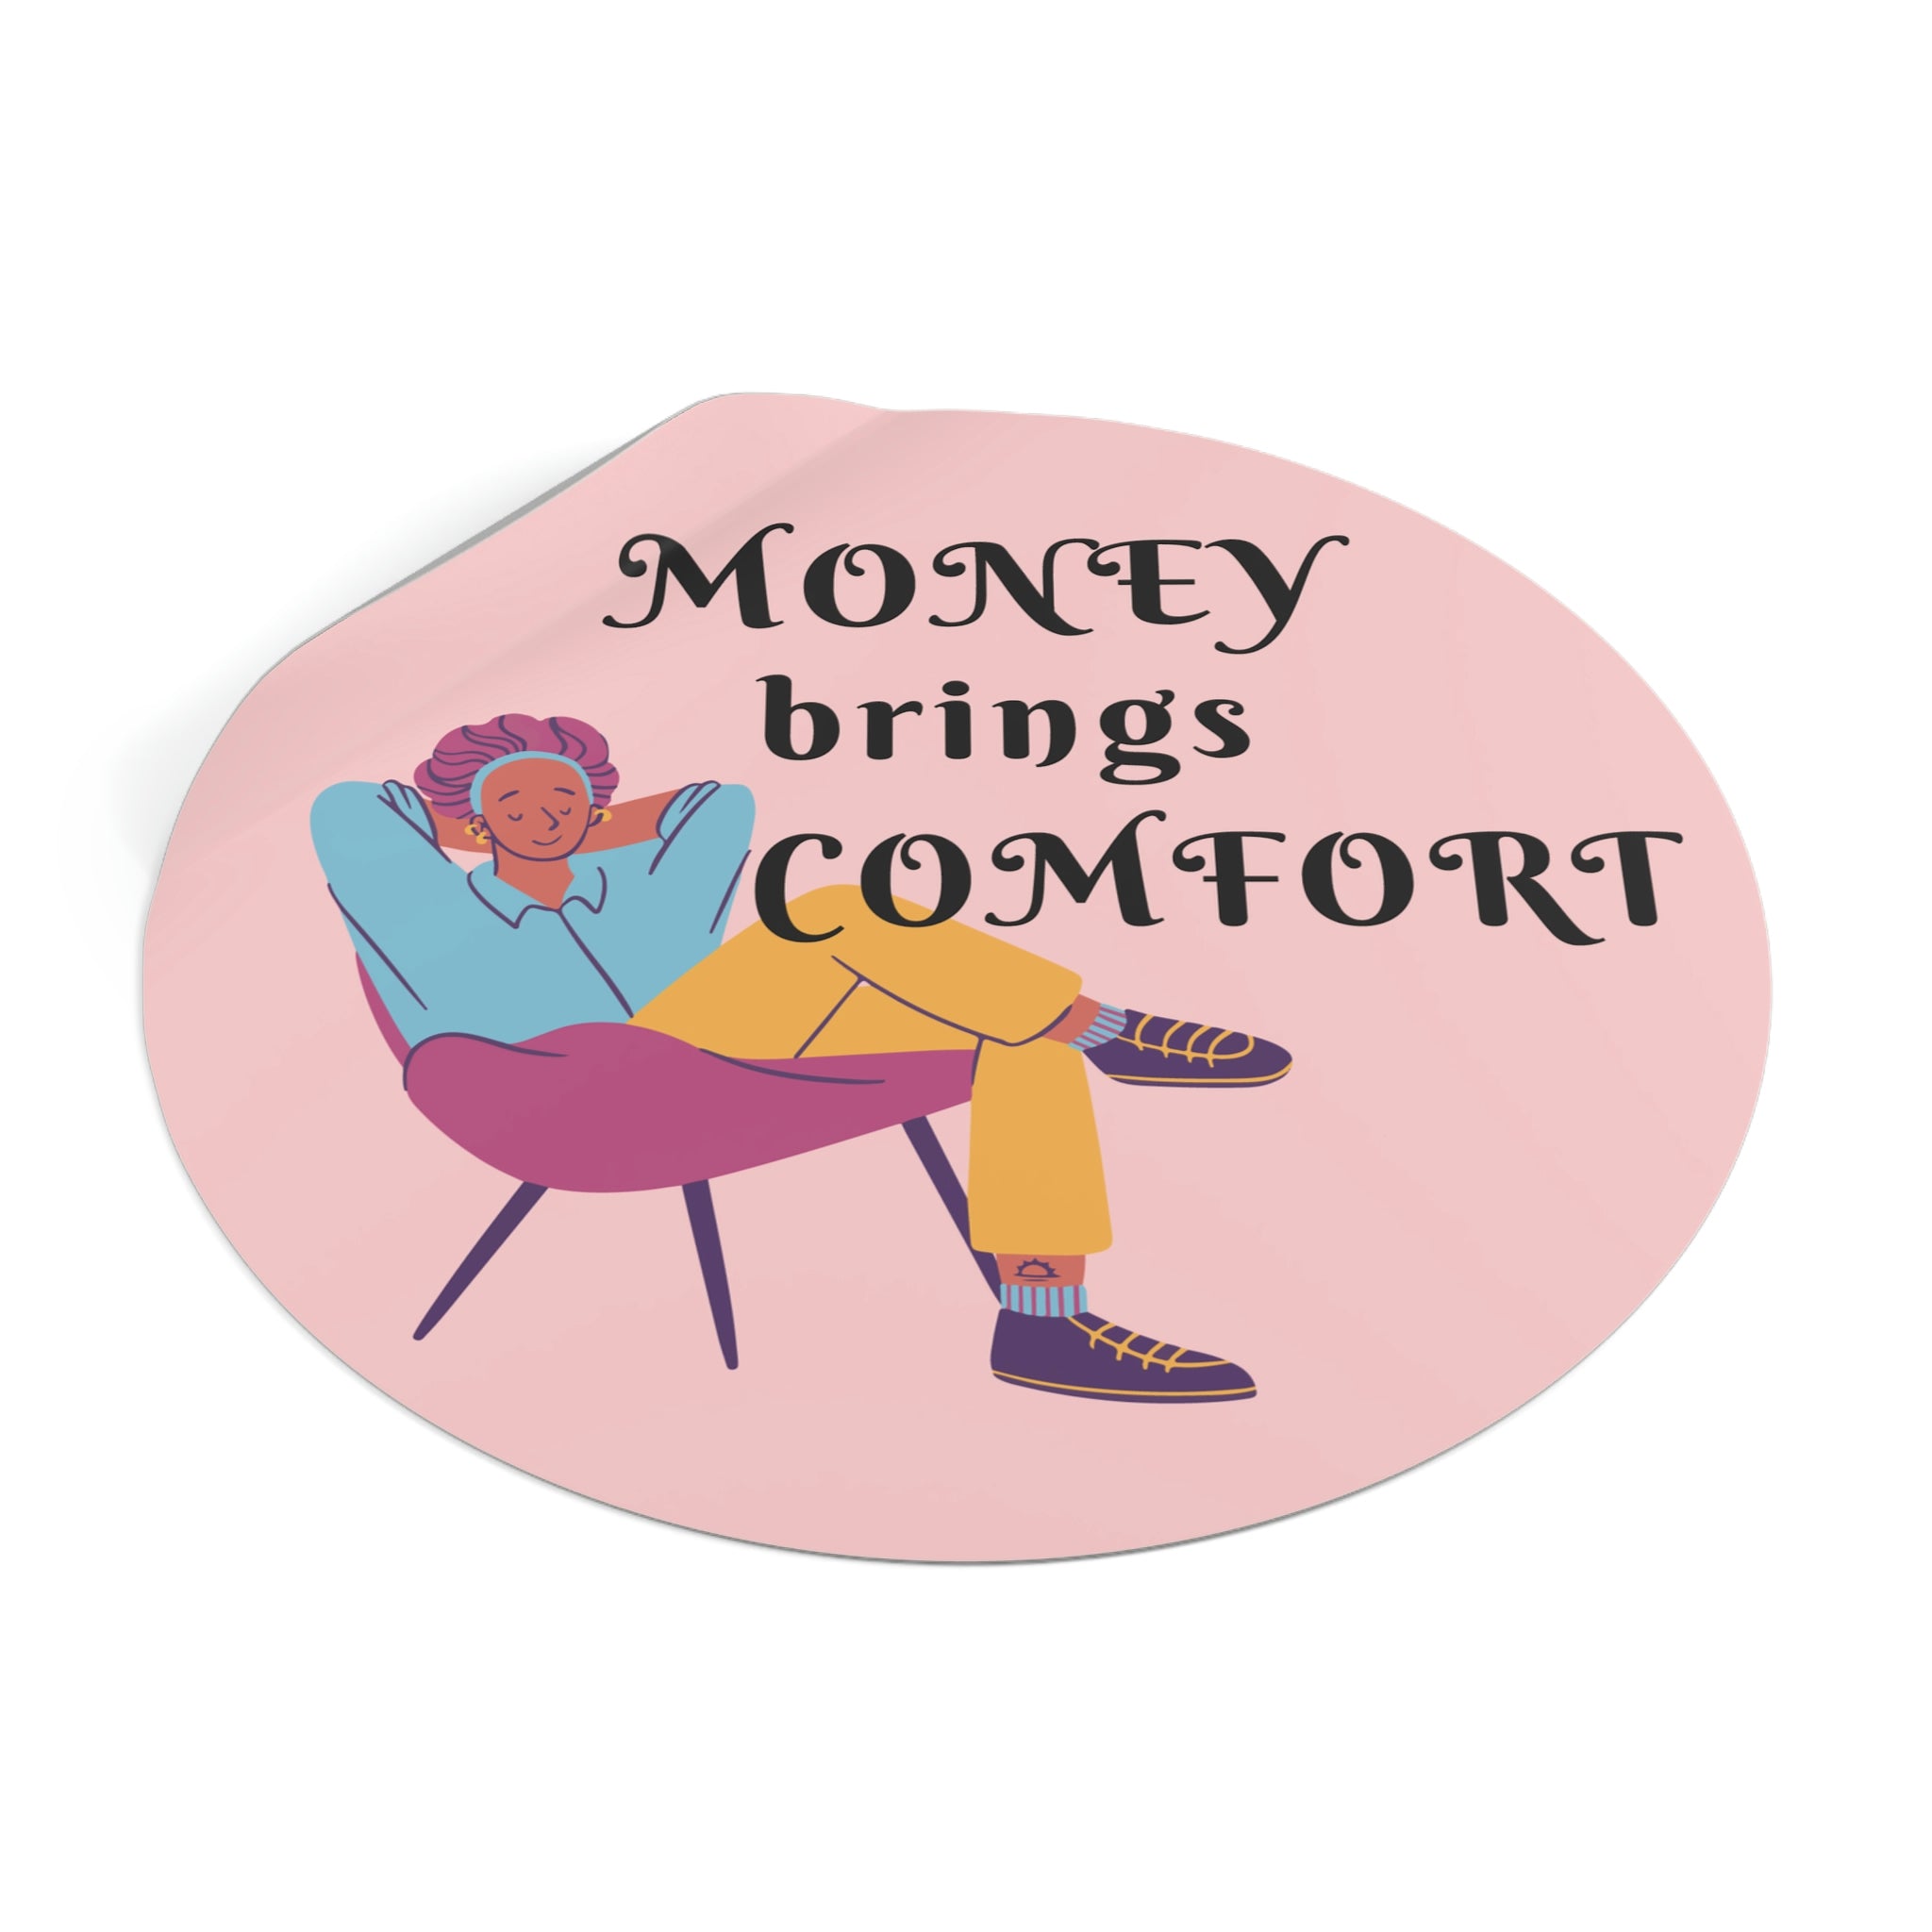 Money brings comfort sticker | Short quotes about making money #size_4x4-inches